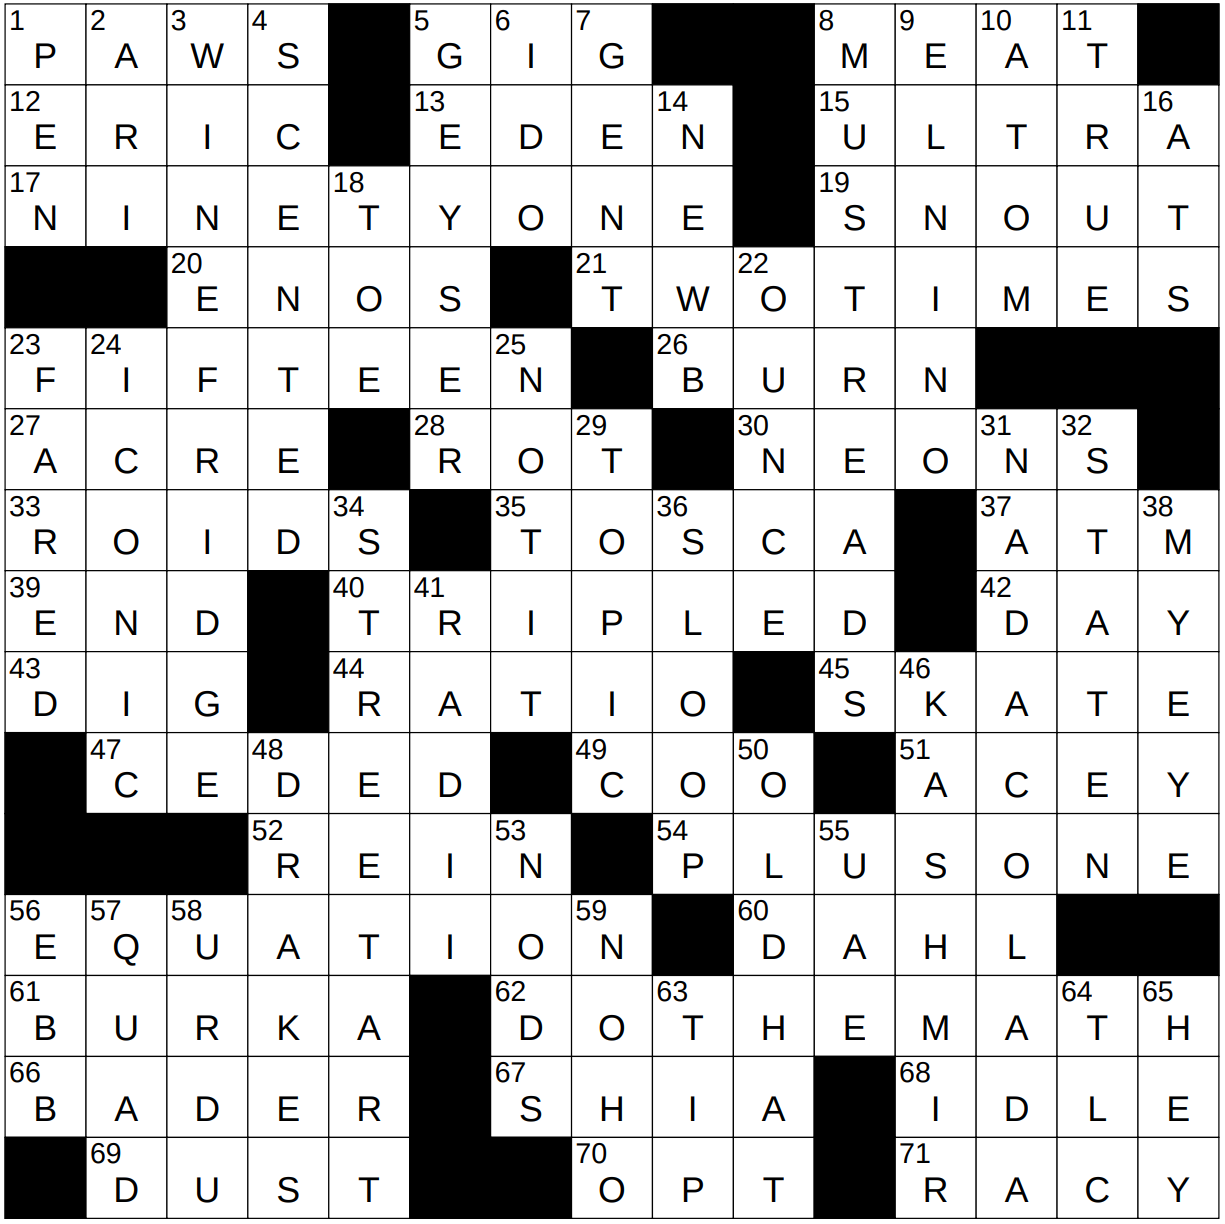 Times Crossword 25,870: times_xwd_times — LiveJournal